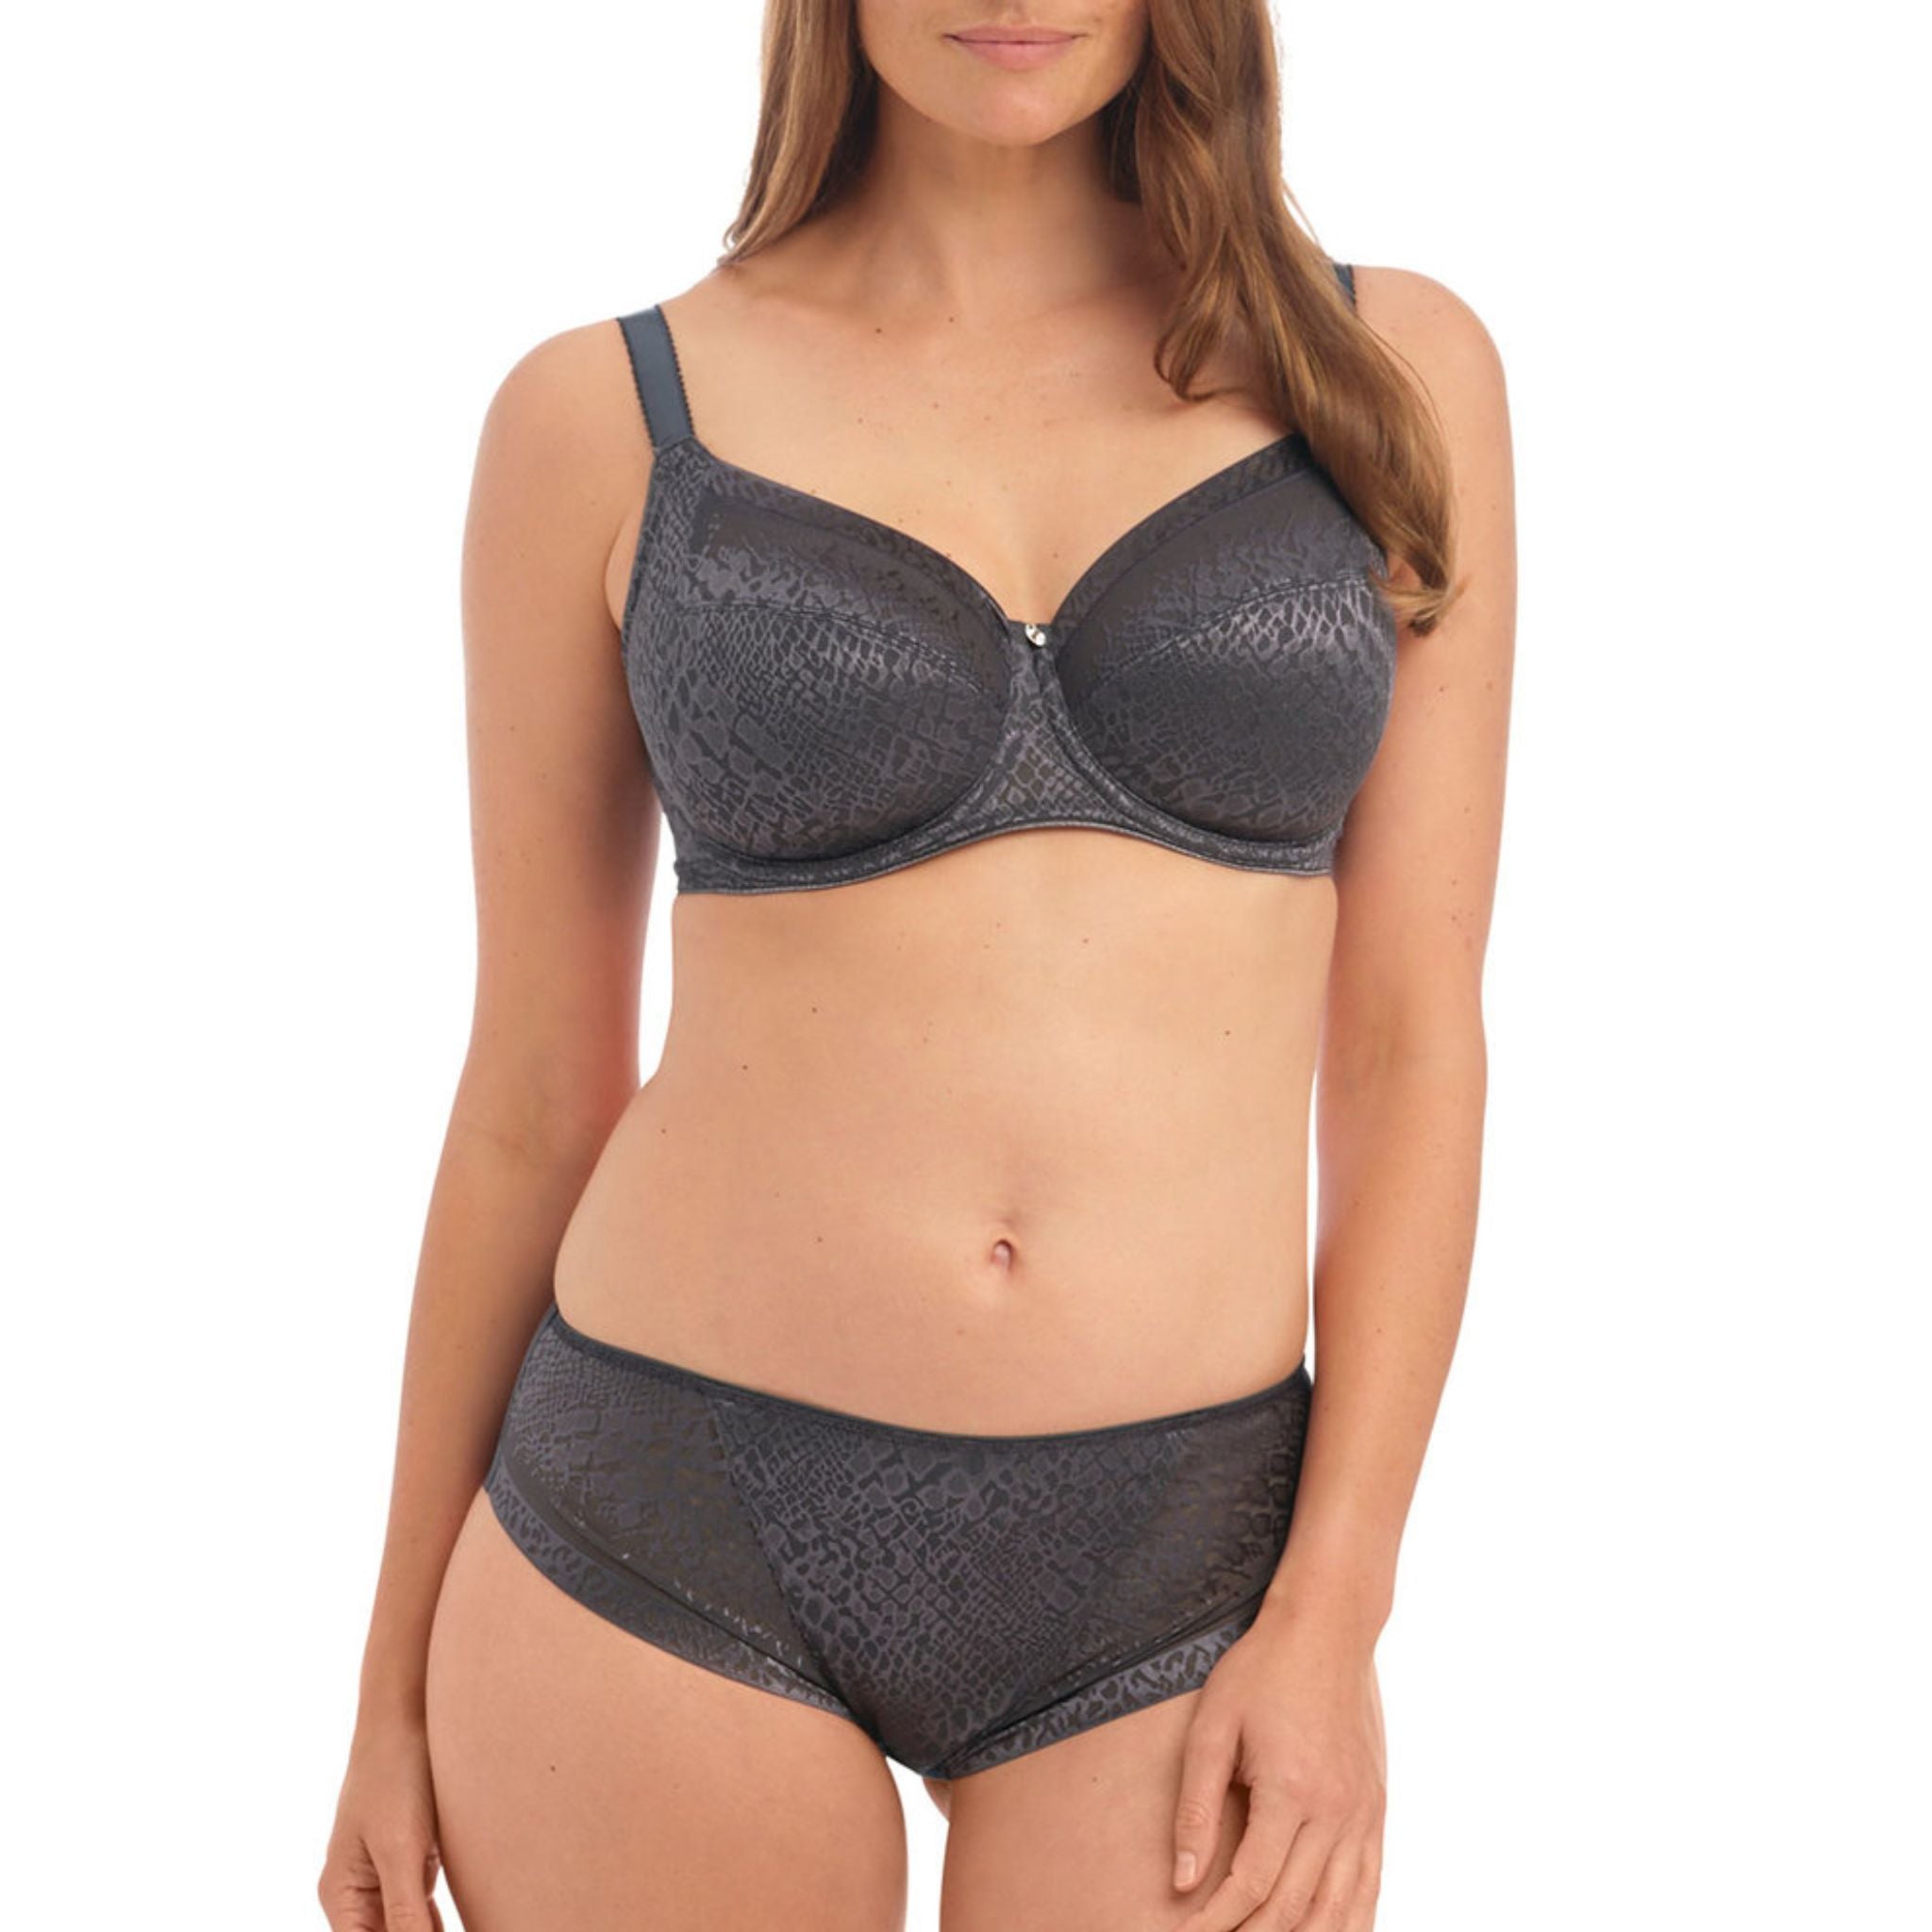 Capture contemporary design with Envisage, now available in a deep Slate colourway. Featuring a subtle shimmer across an on-trend snake effect design, the Full Cup Side Support Bra offers a fuller coverage and three piece cups to provide uplift and support, perfect for every day.